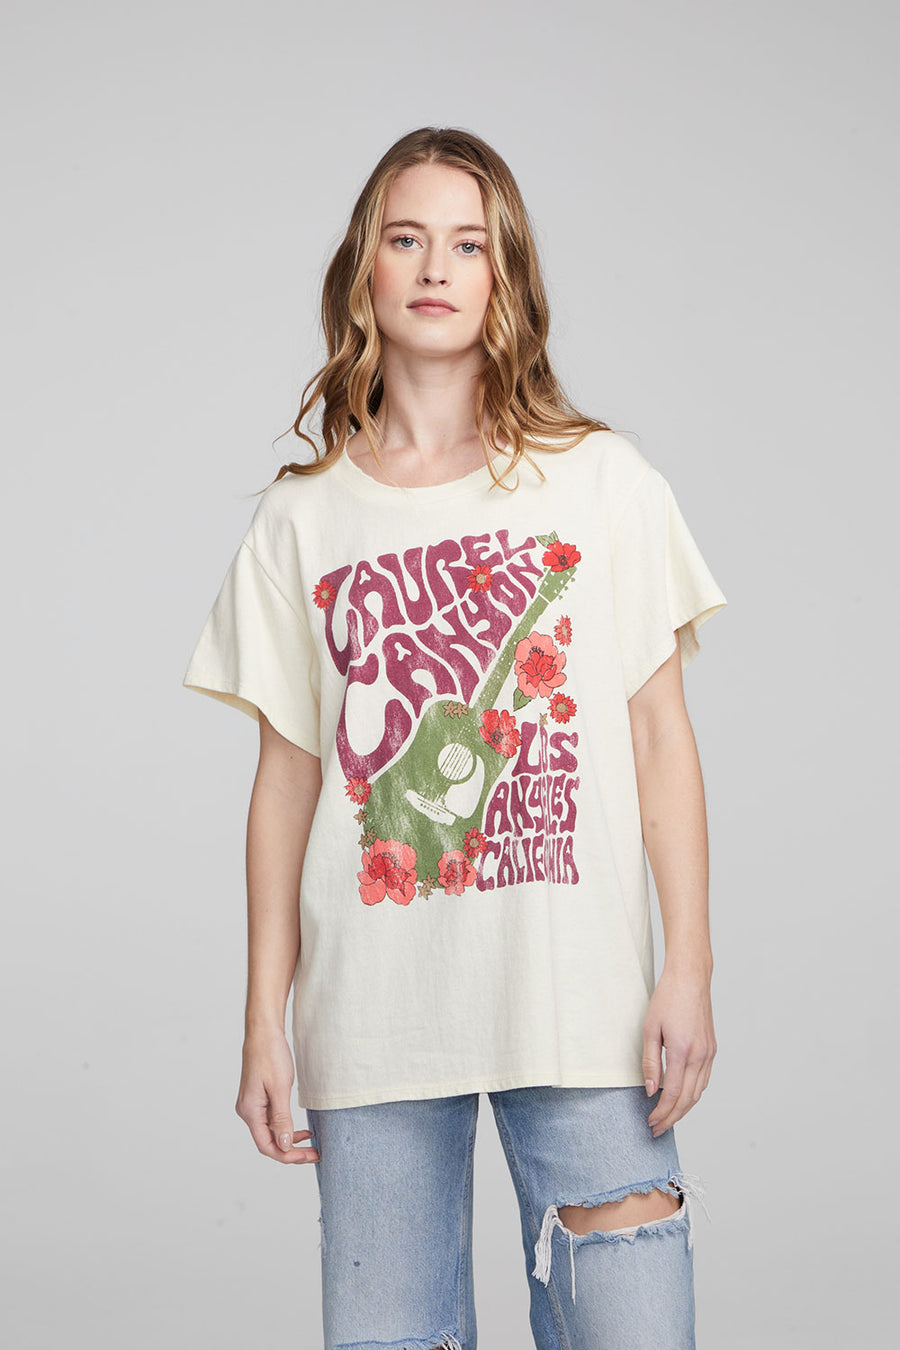 Laurel Canyon Poster WOMENS chaserbrand